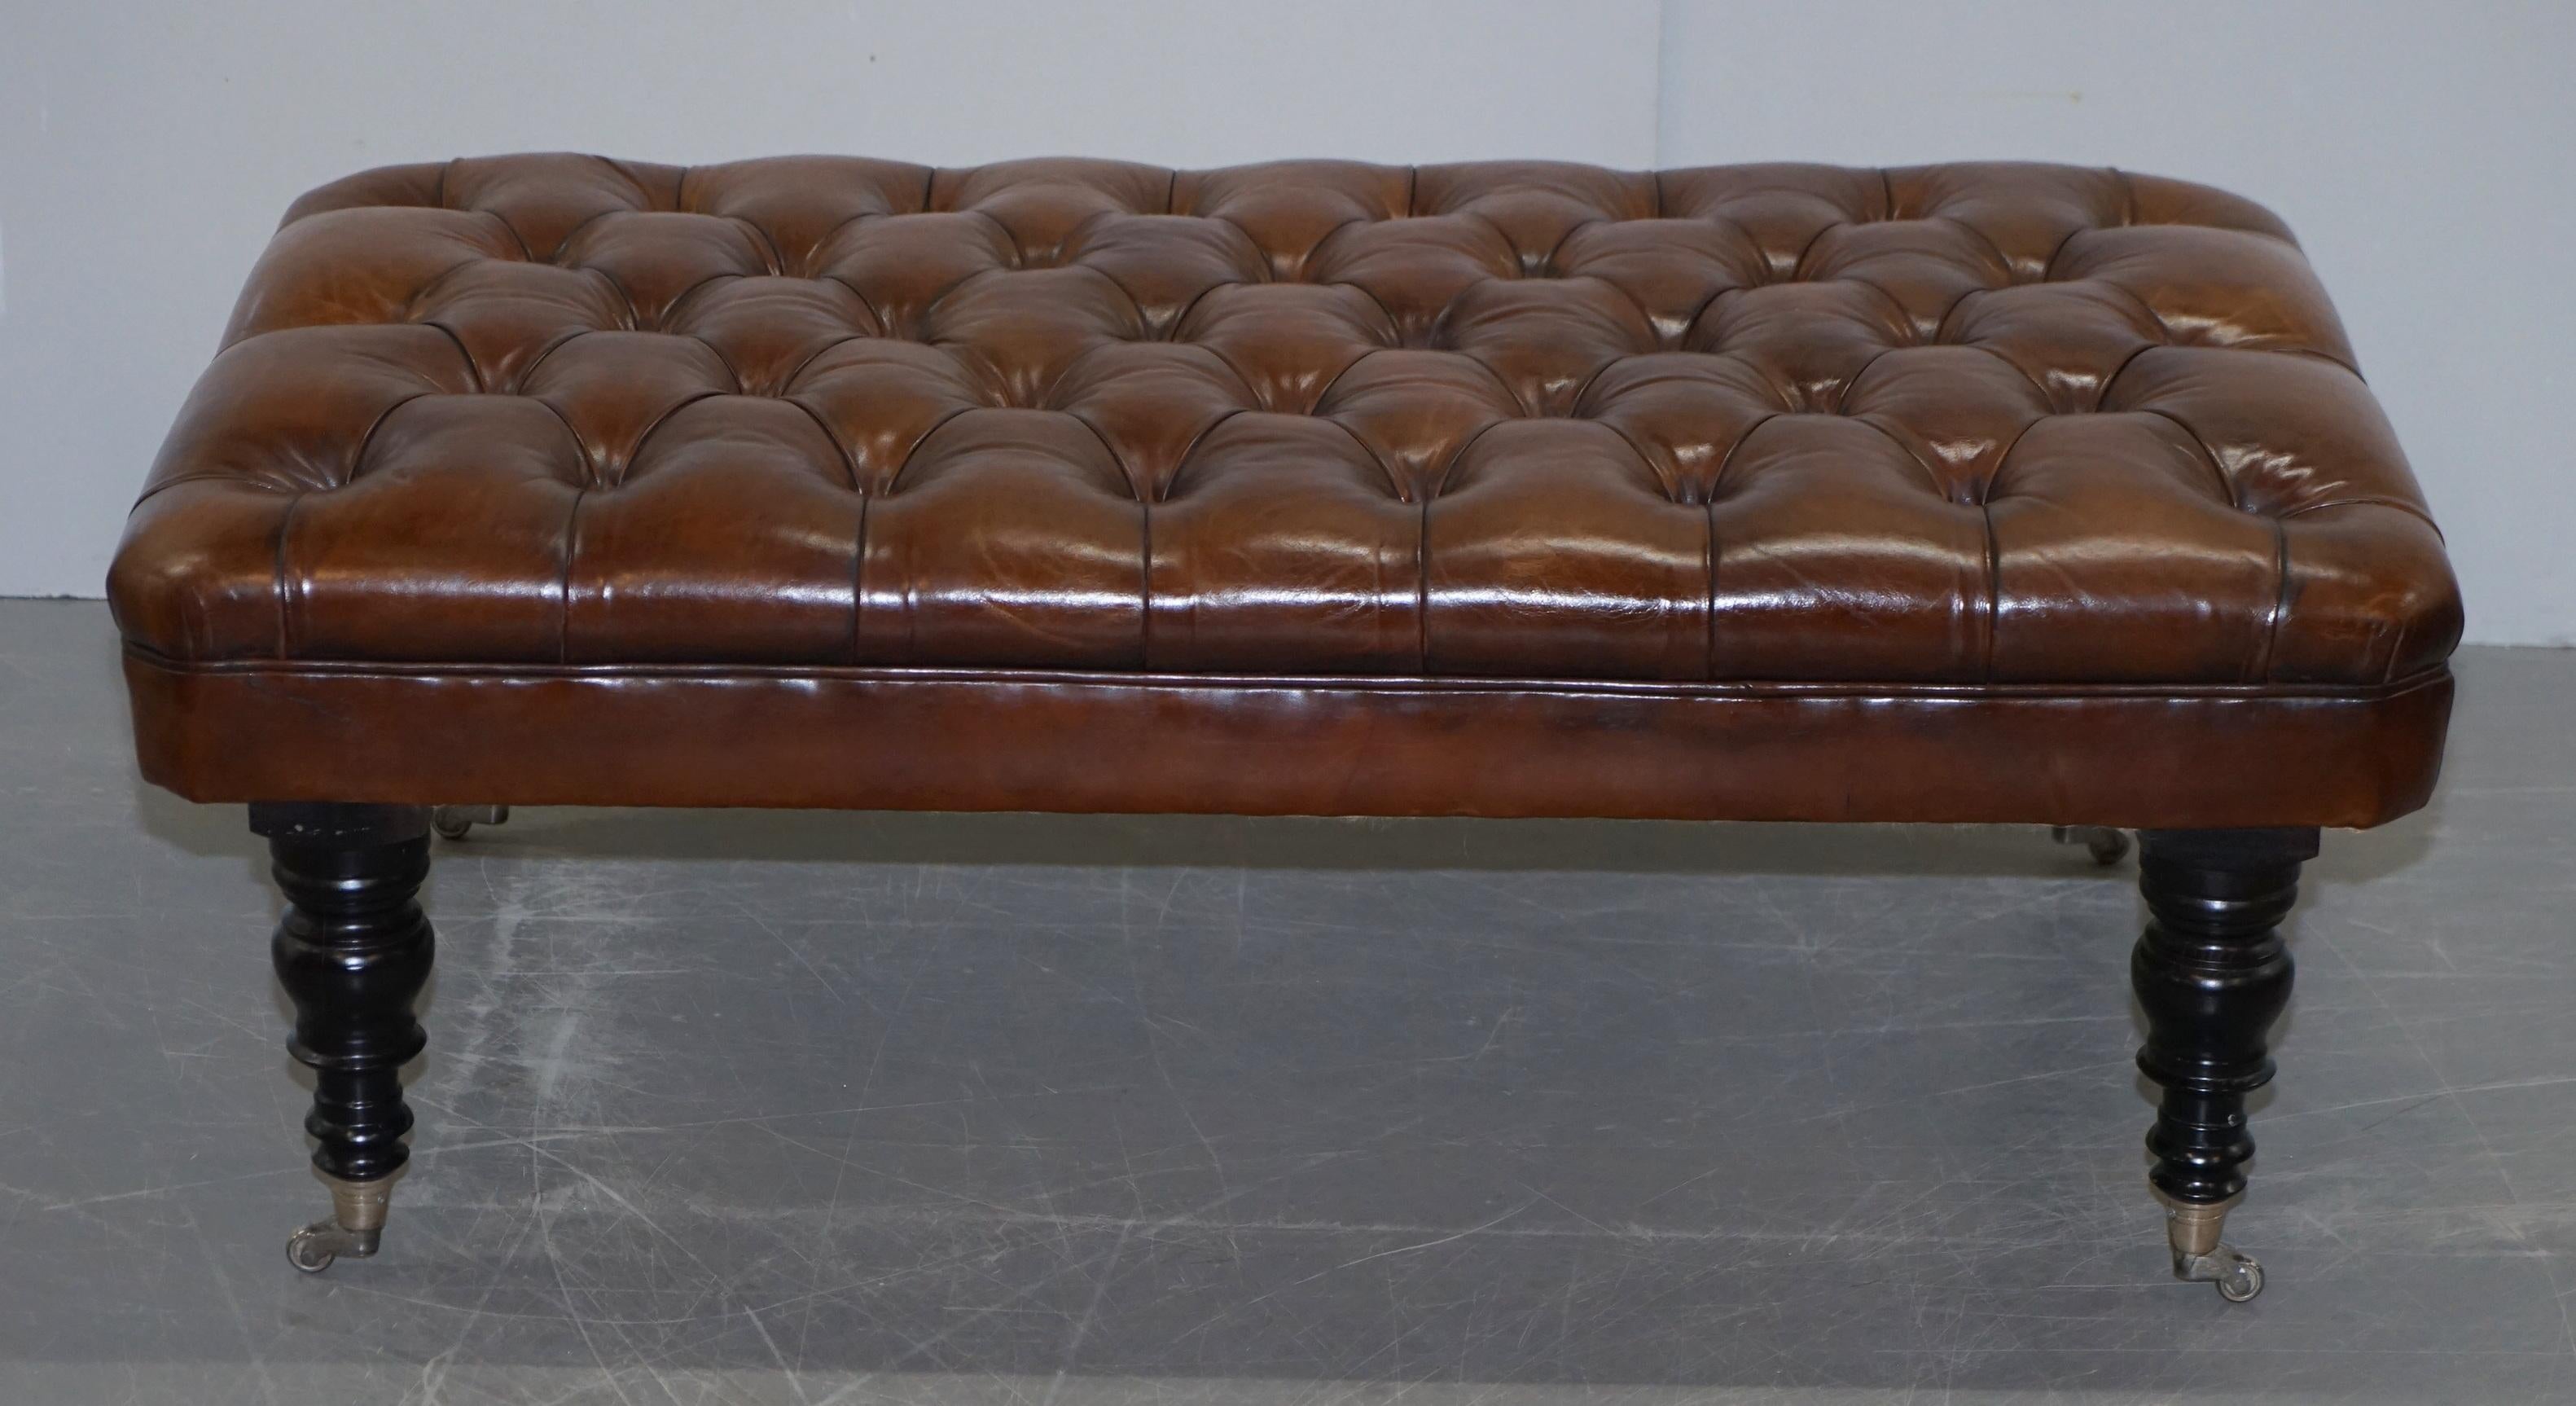 We are delighted to offer 1 of 2 fully restored very large hand dyed cigar brown leather Chesterfield buttoned George Smith hearth footstools

This is for one stool with the option to purchase up to two

These stools were originally purchased from